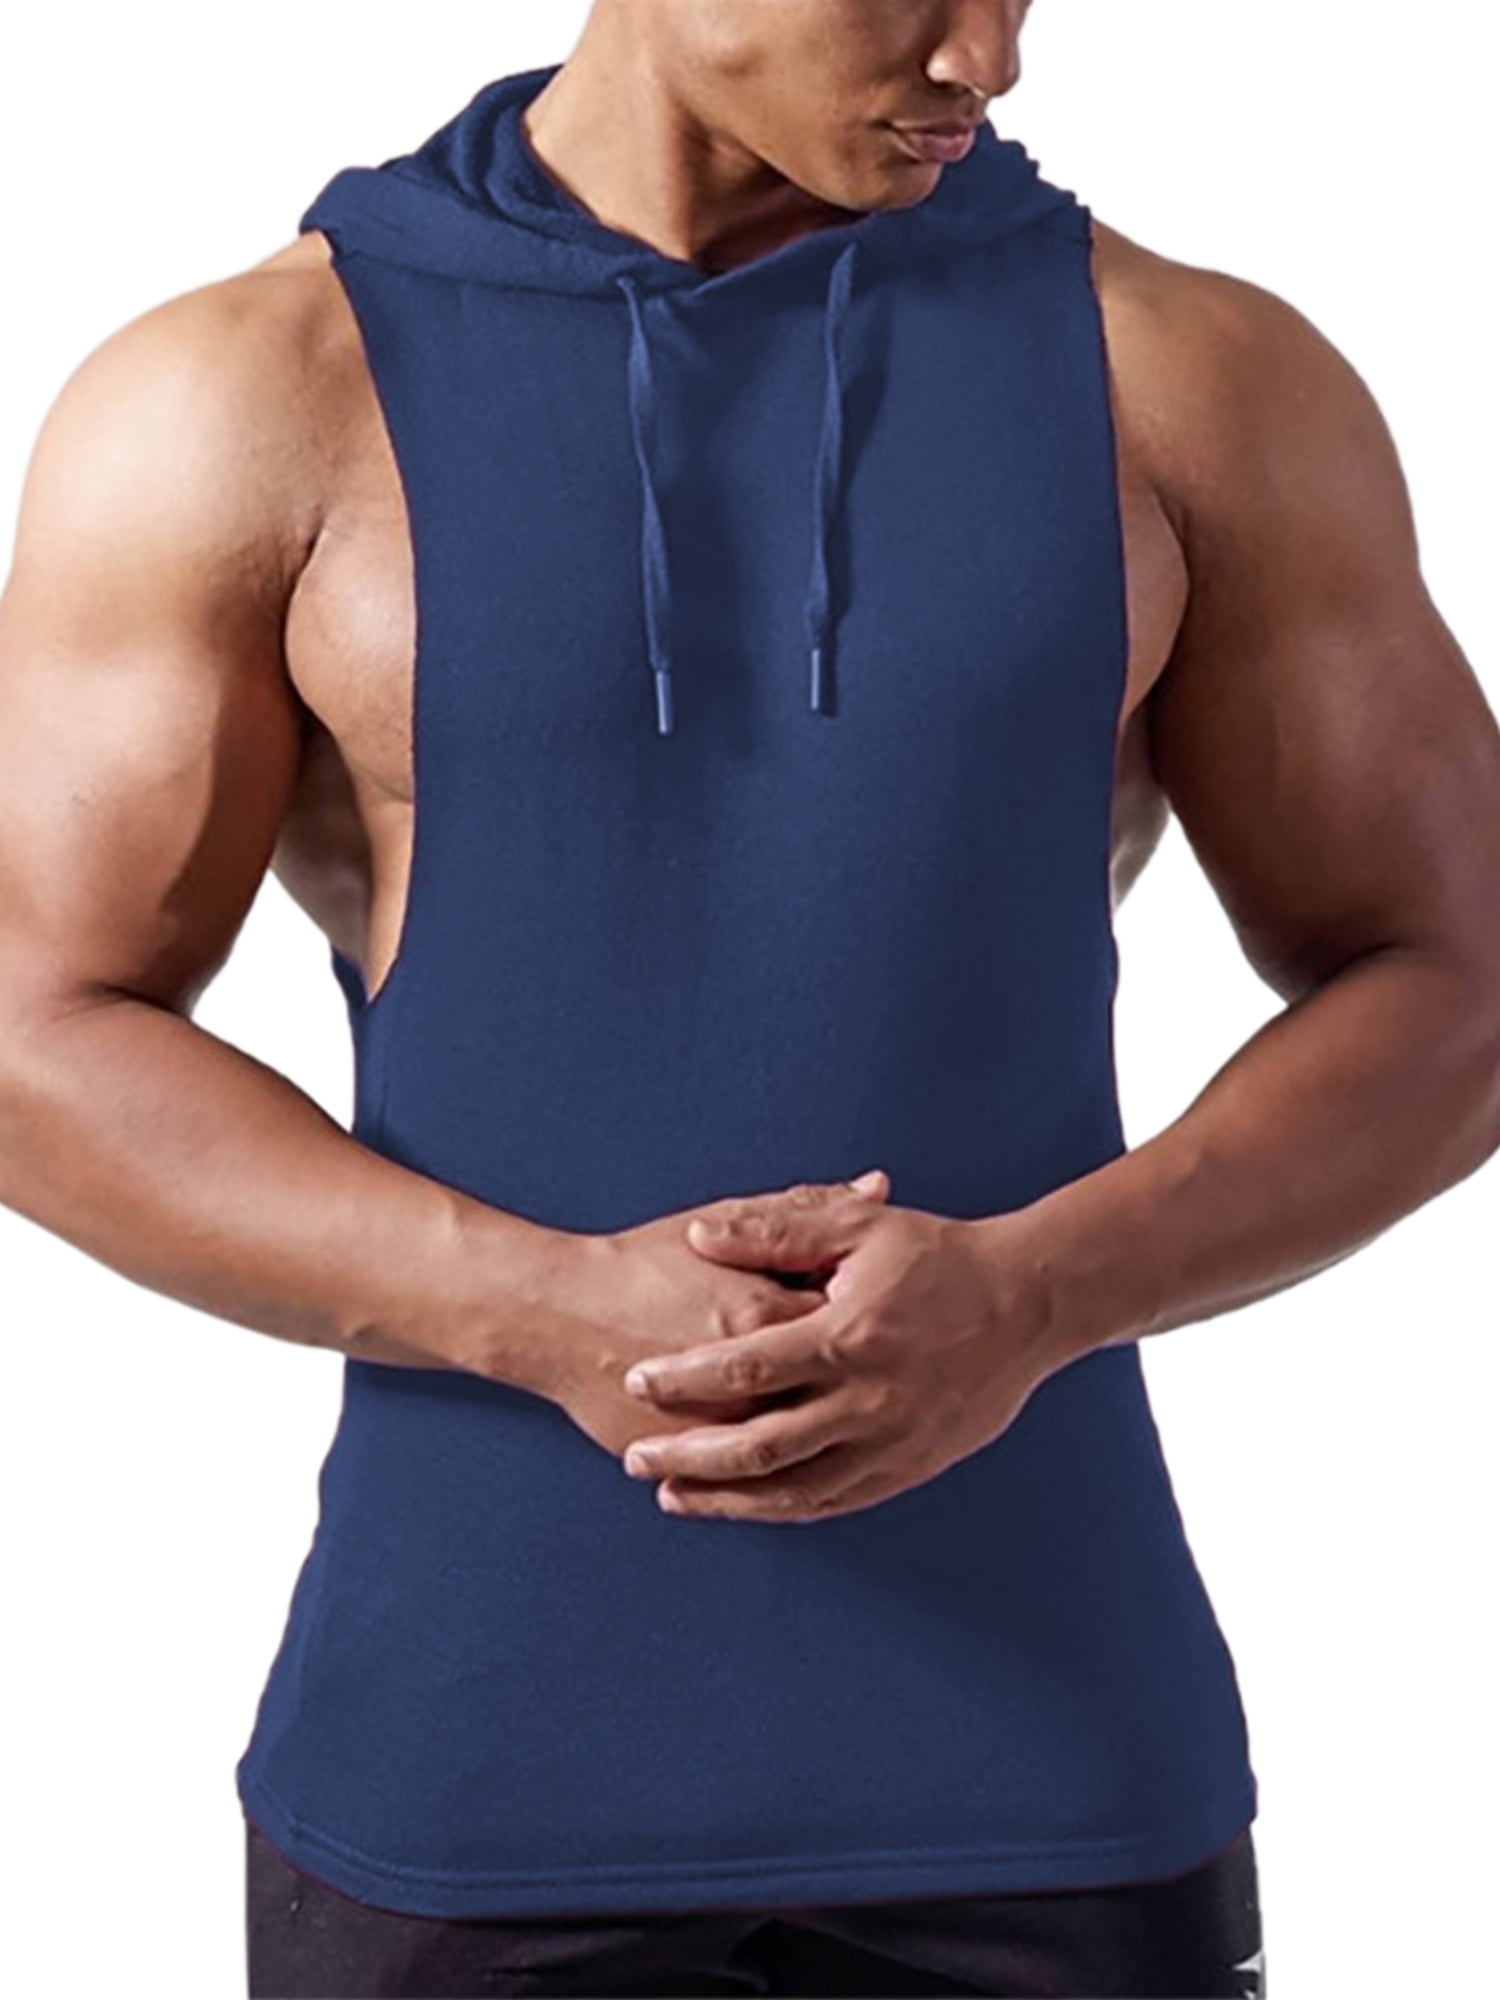 Mens Hoodies Men's Workout Hooded Tank Tops Sports Training Sleeveless Gym Hoodies Bodybuilding Cut Off Muscle Shirts 